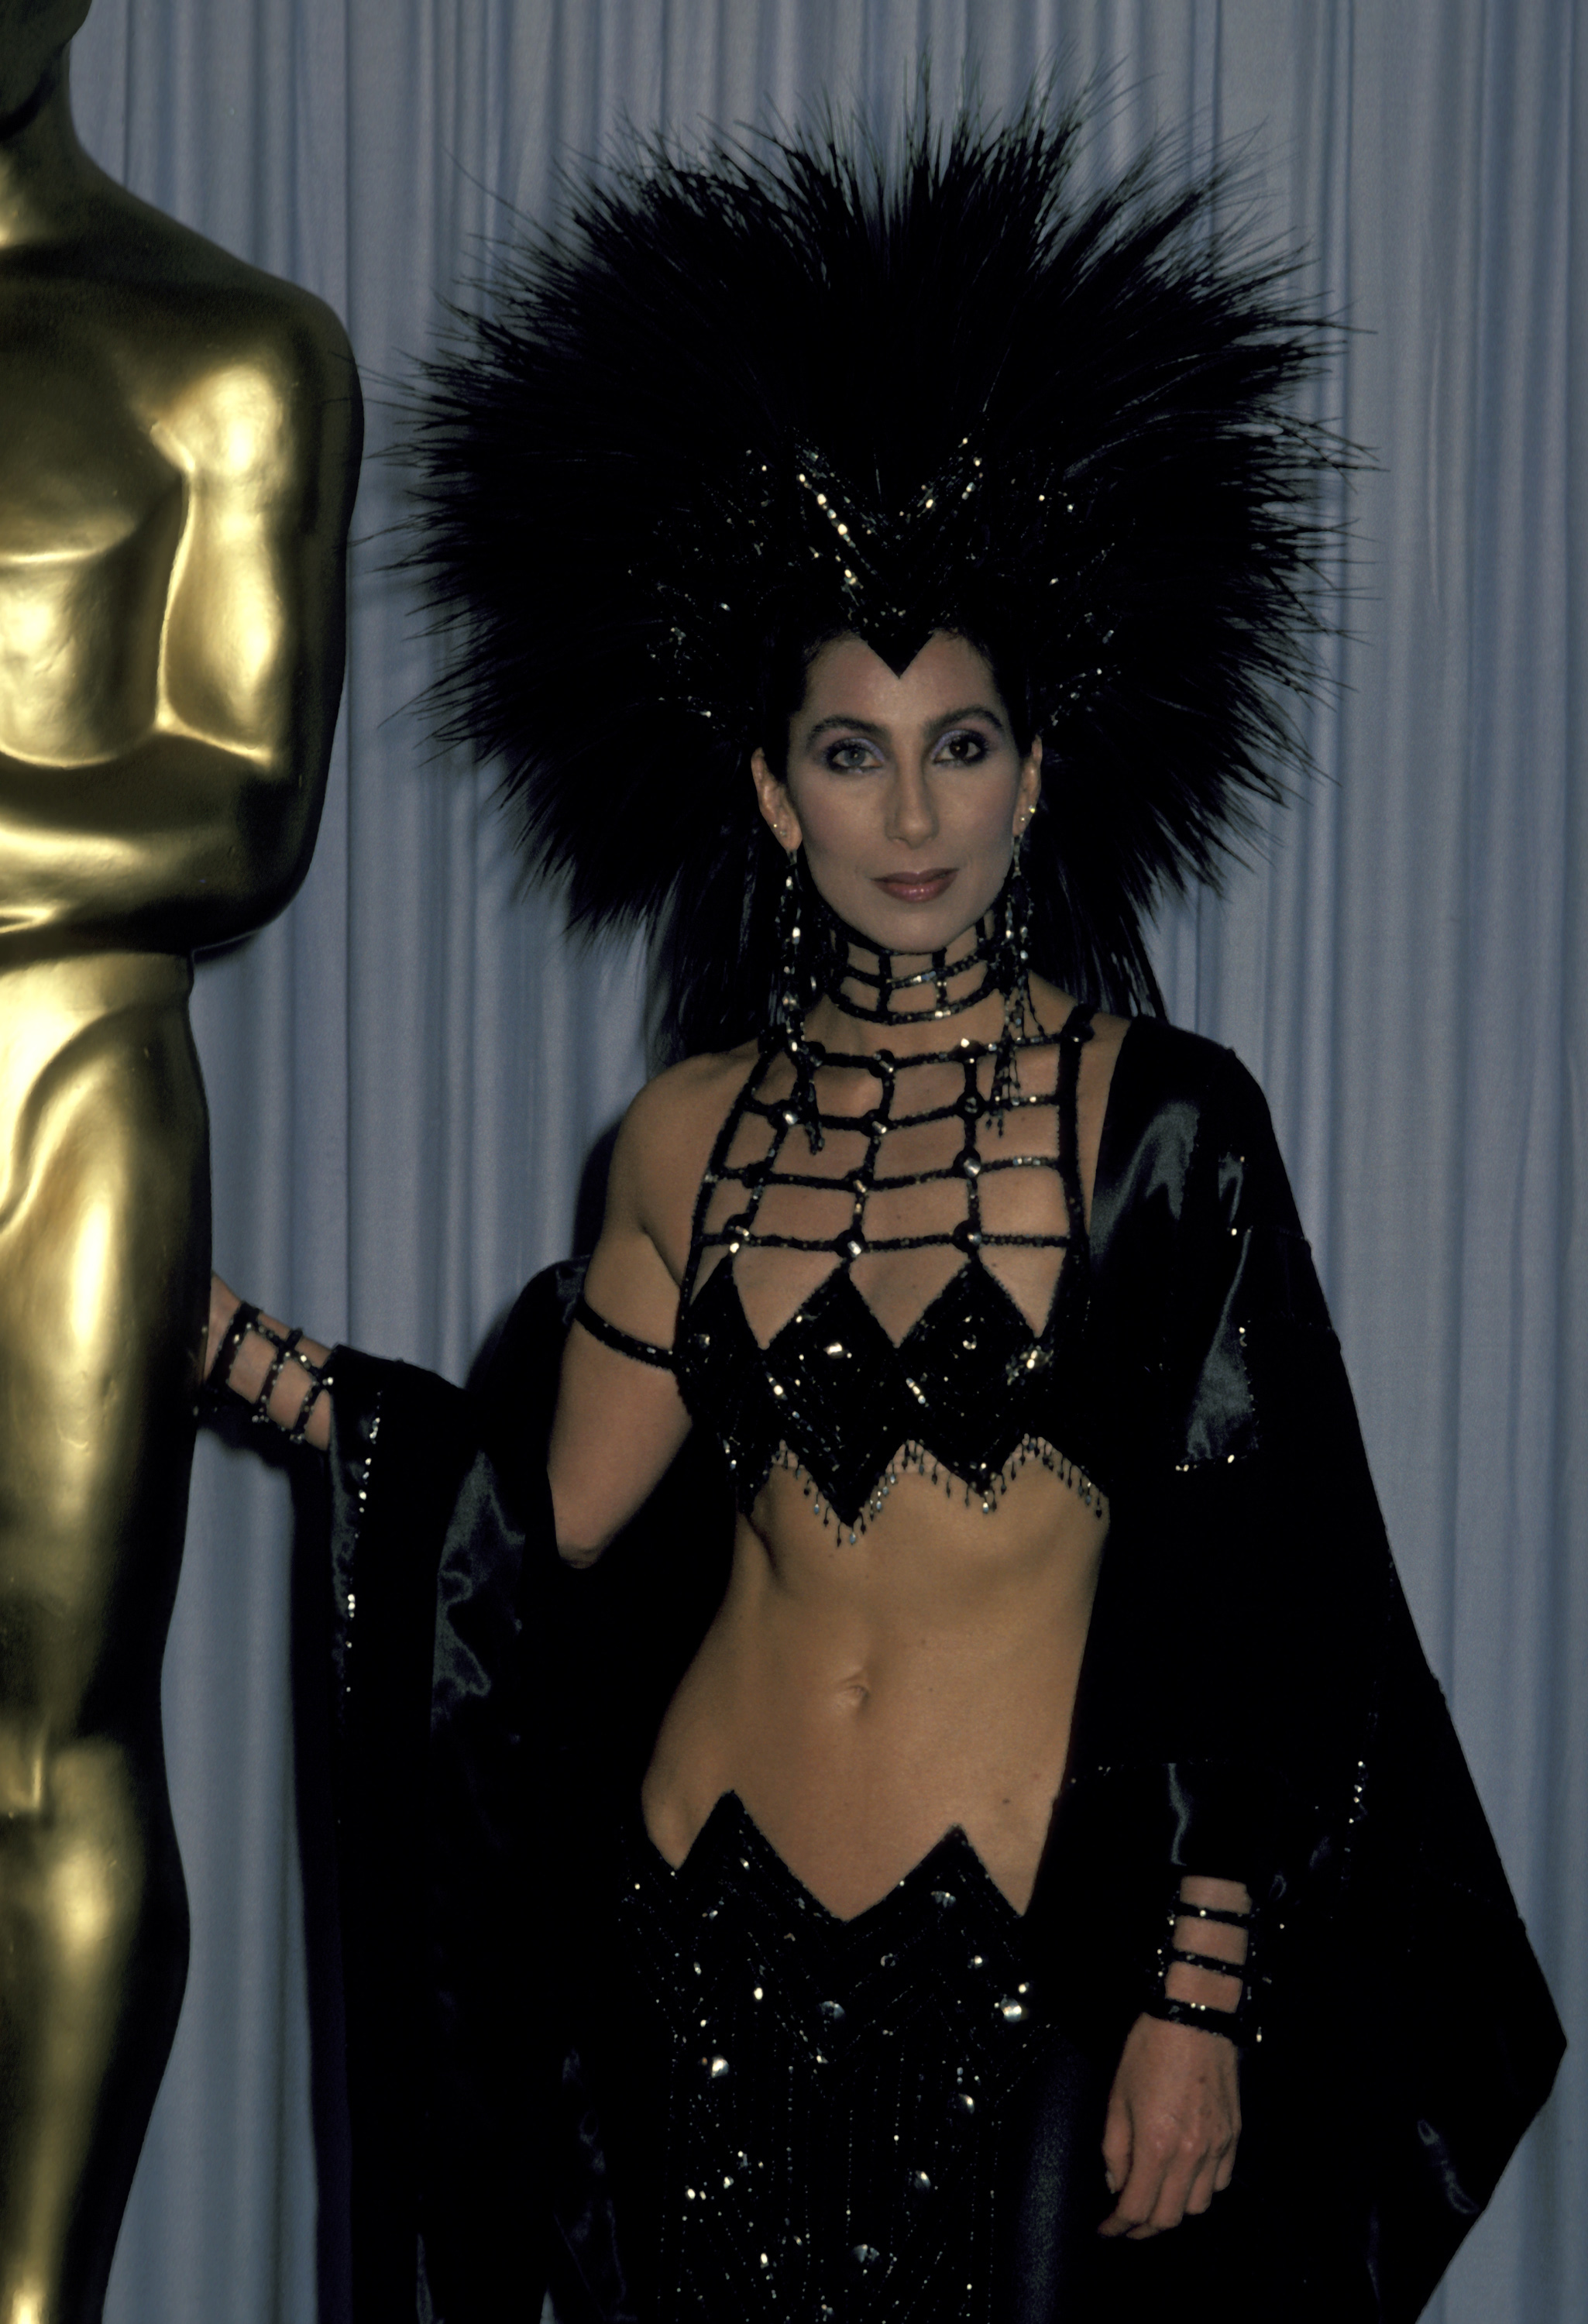 Cher's most iconic outfits